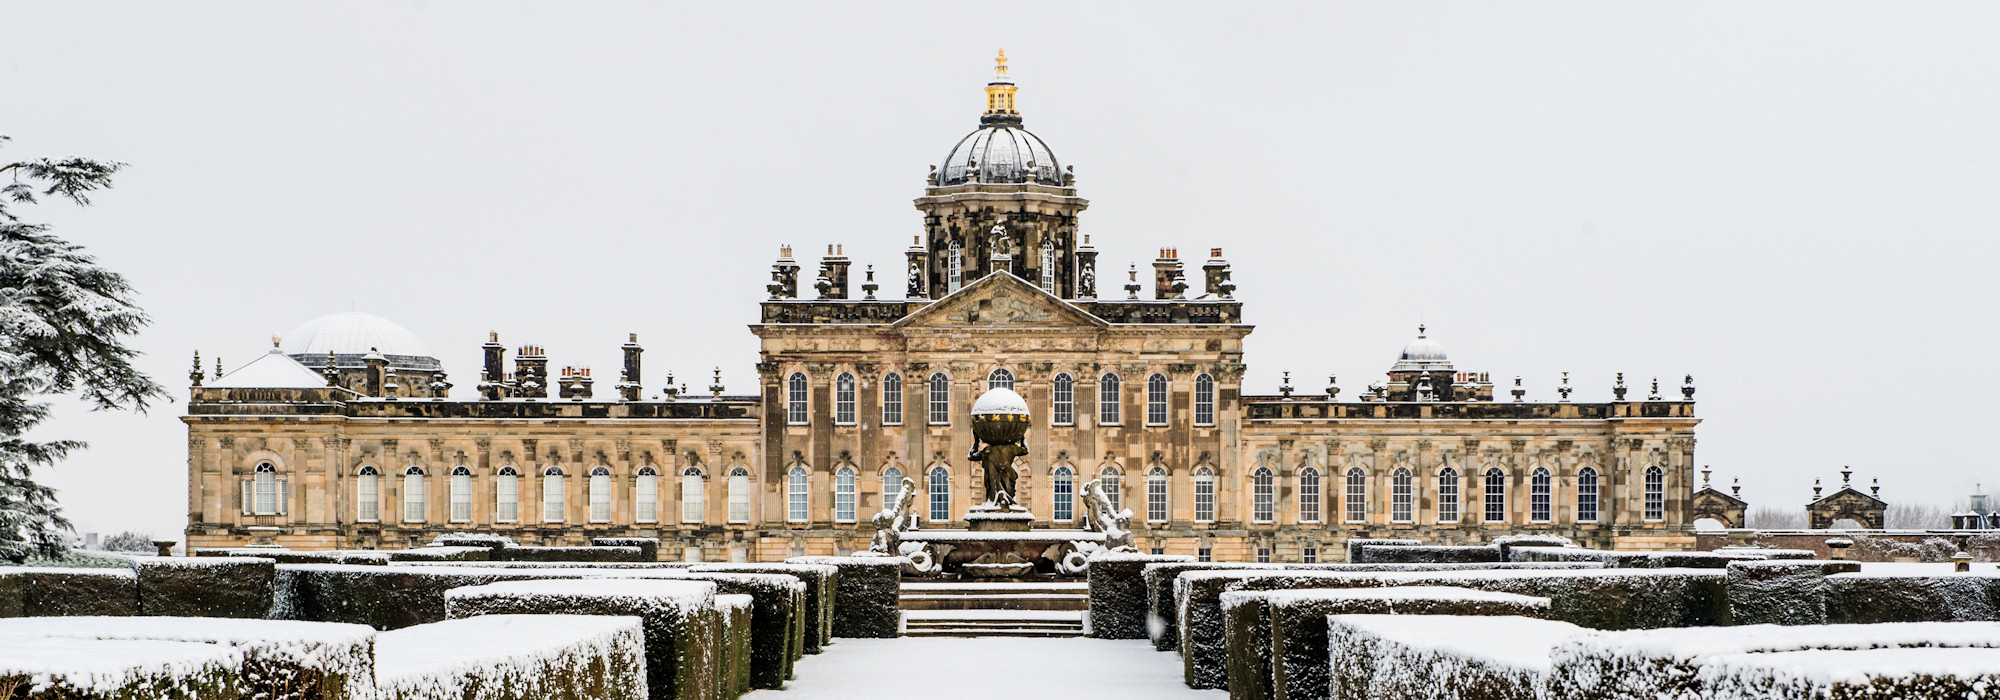 Snow at Castle Howard